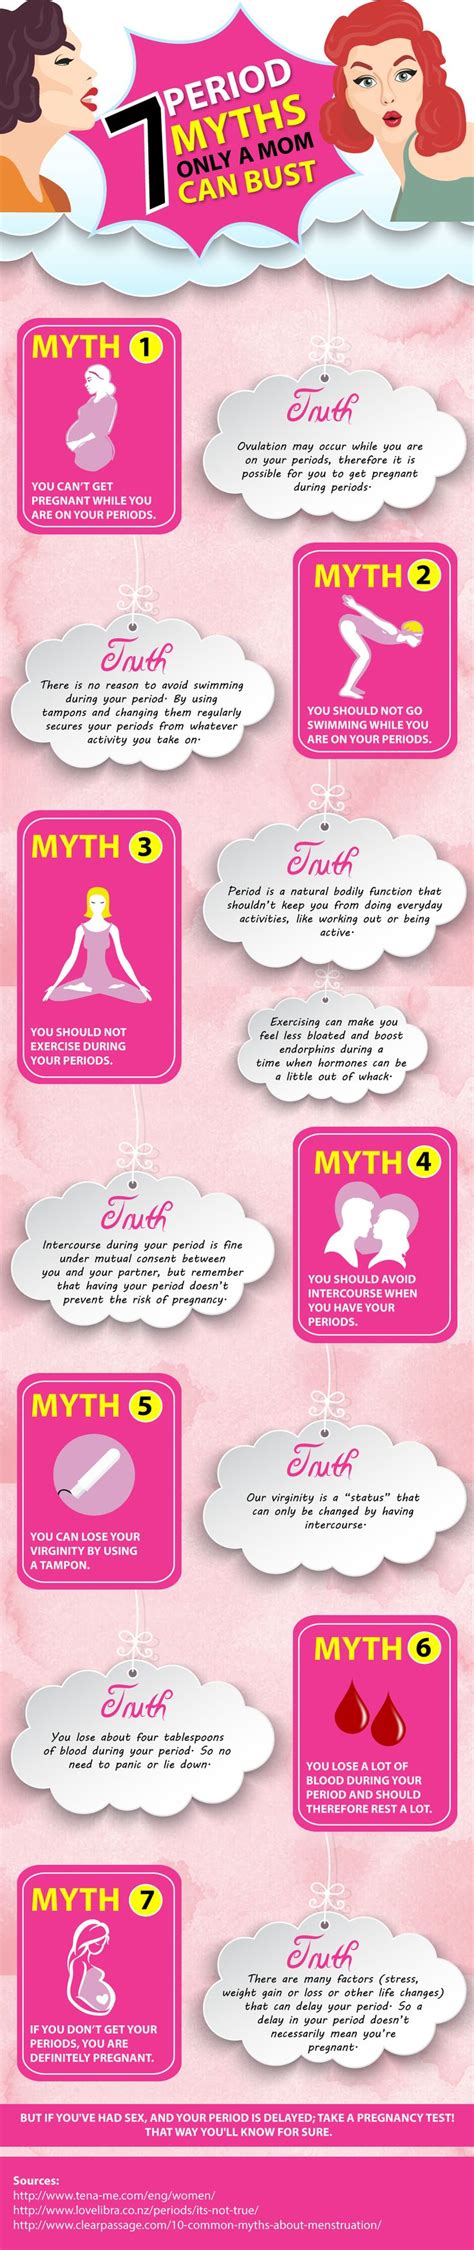 There Are Many Periods Myths Which Keep On Wandering Around Us Here Are The 7 Period Myths